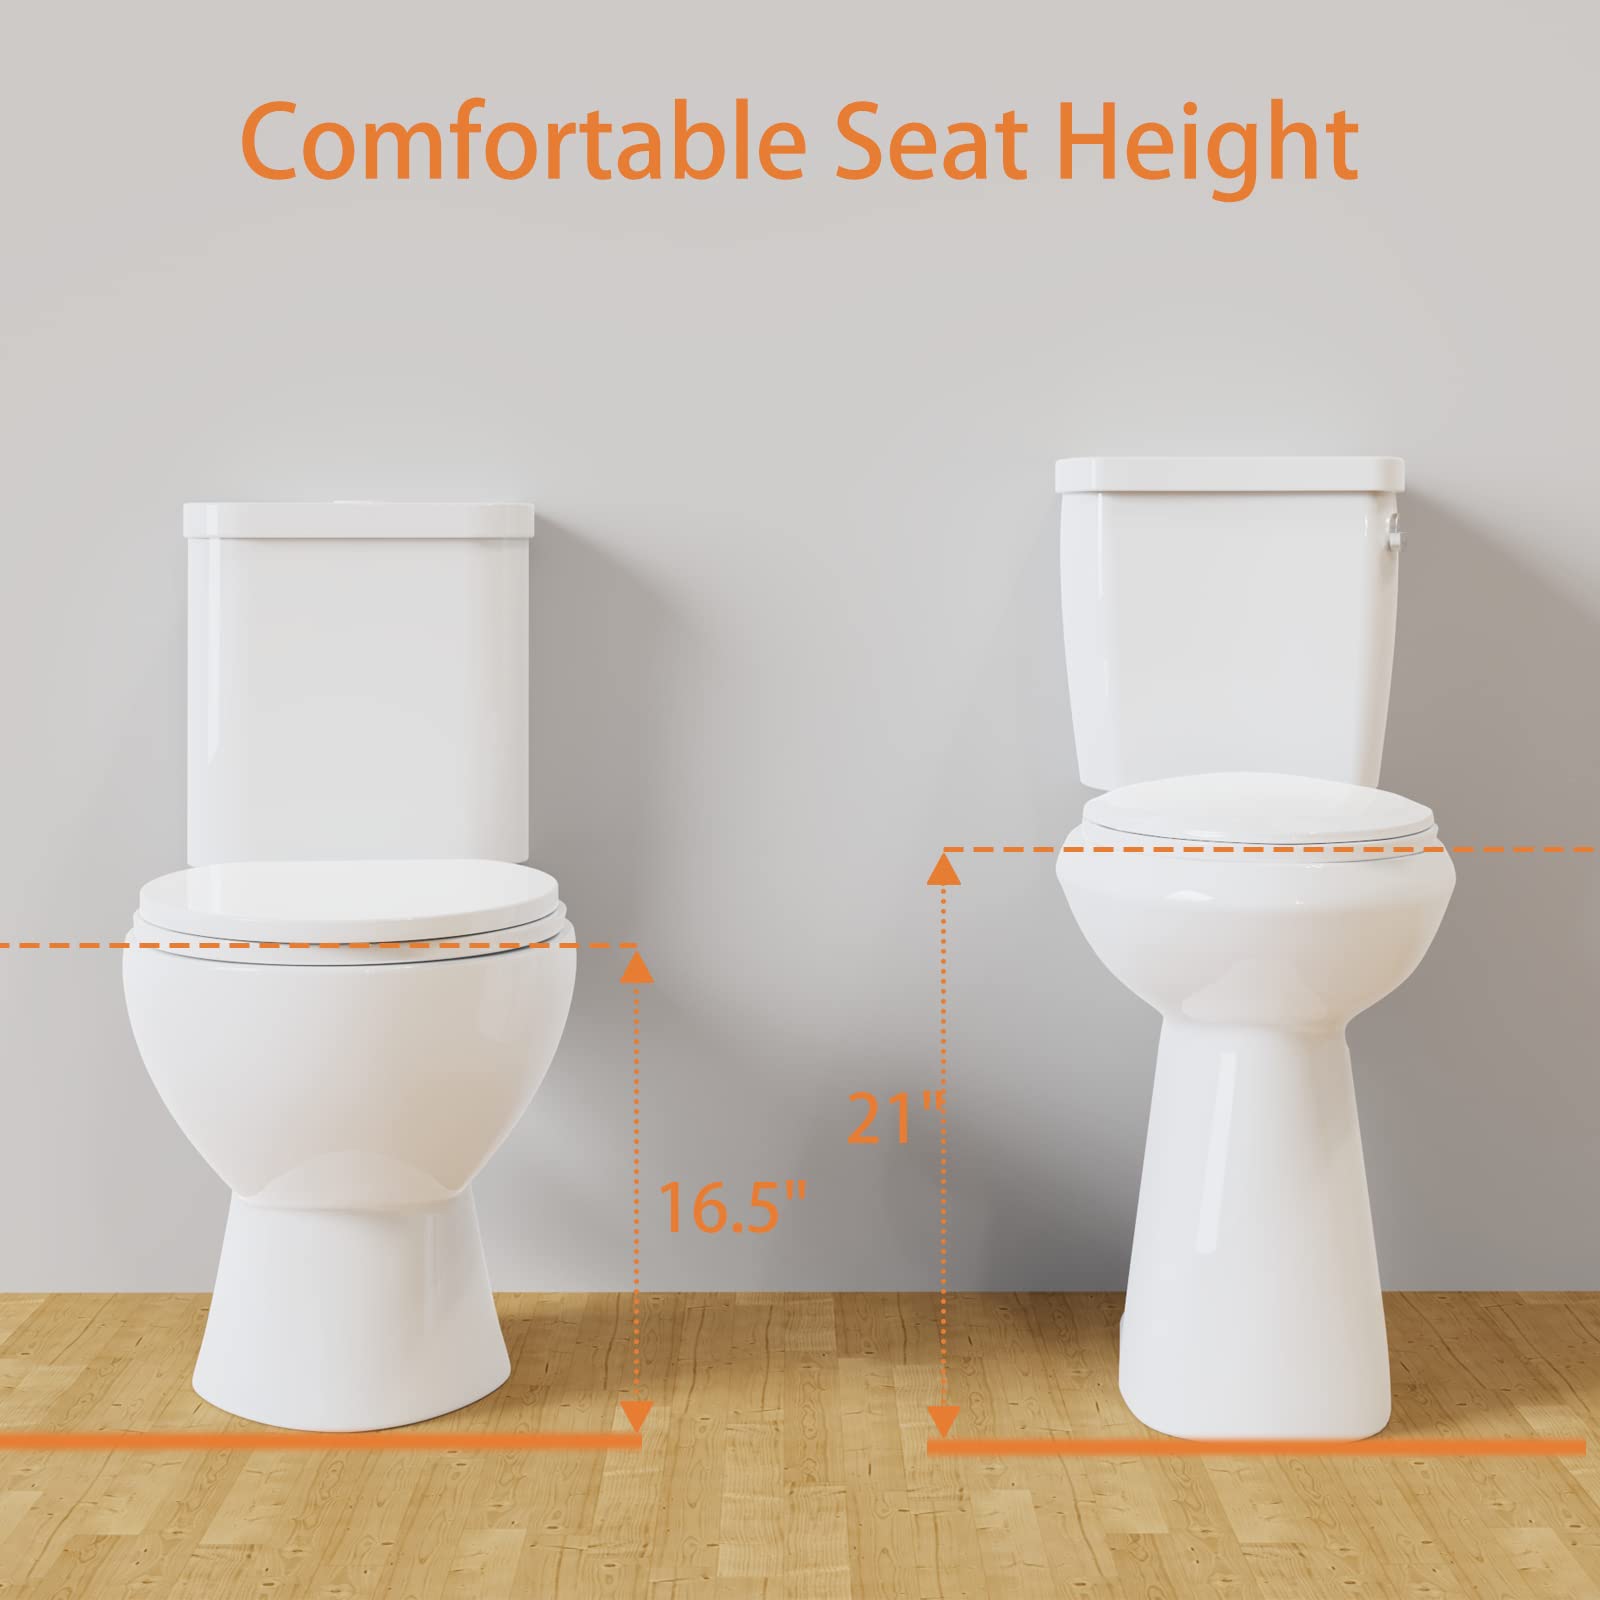 Simple Project 21" Elongated Tall Toilet | Two-piece High Toilets With Standard 12-in Rough-in | Single Flush High Toilets For Seniors, Disabled & Tall Person